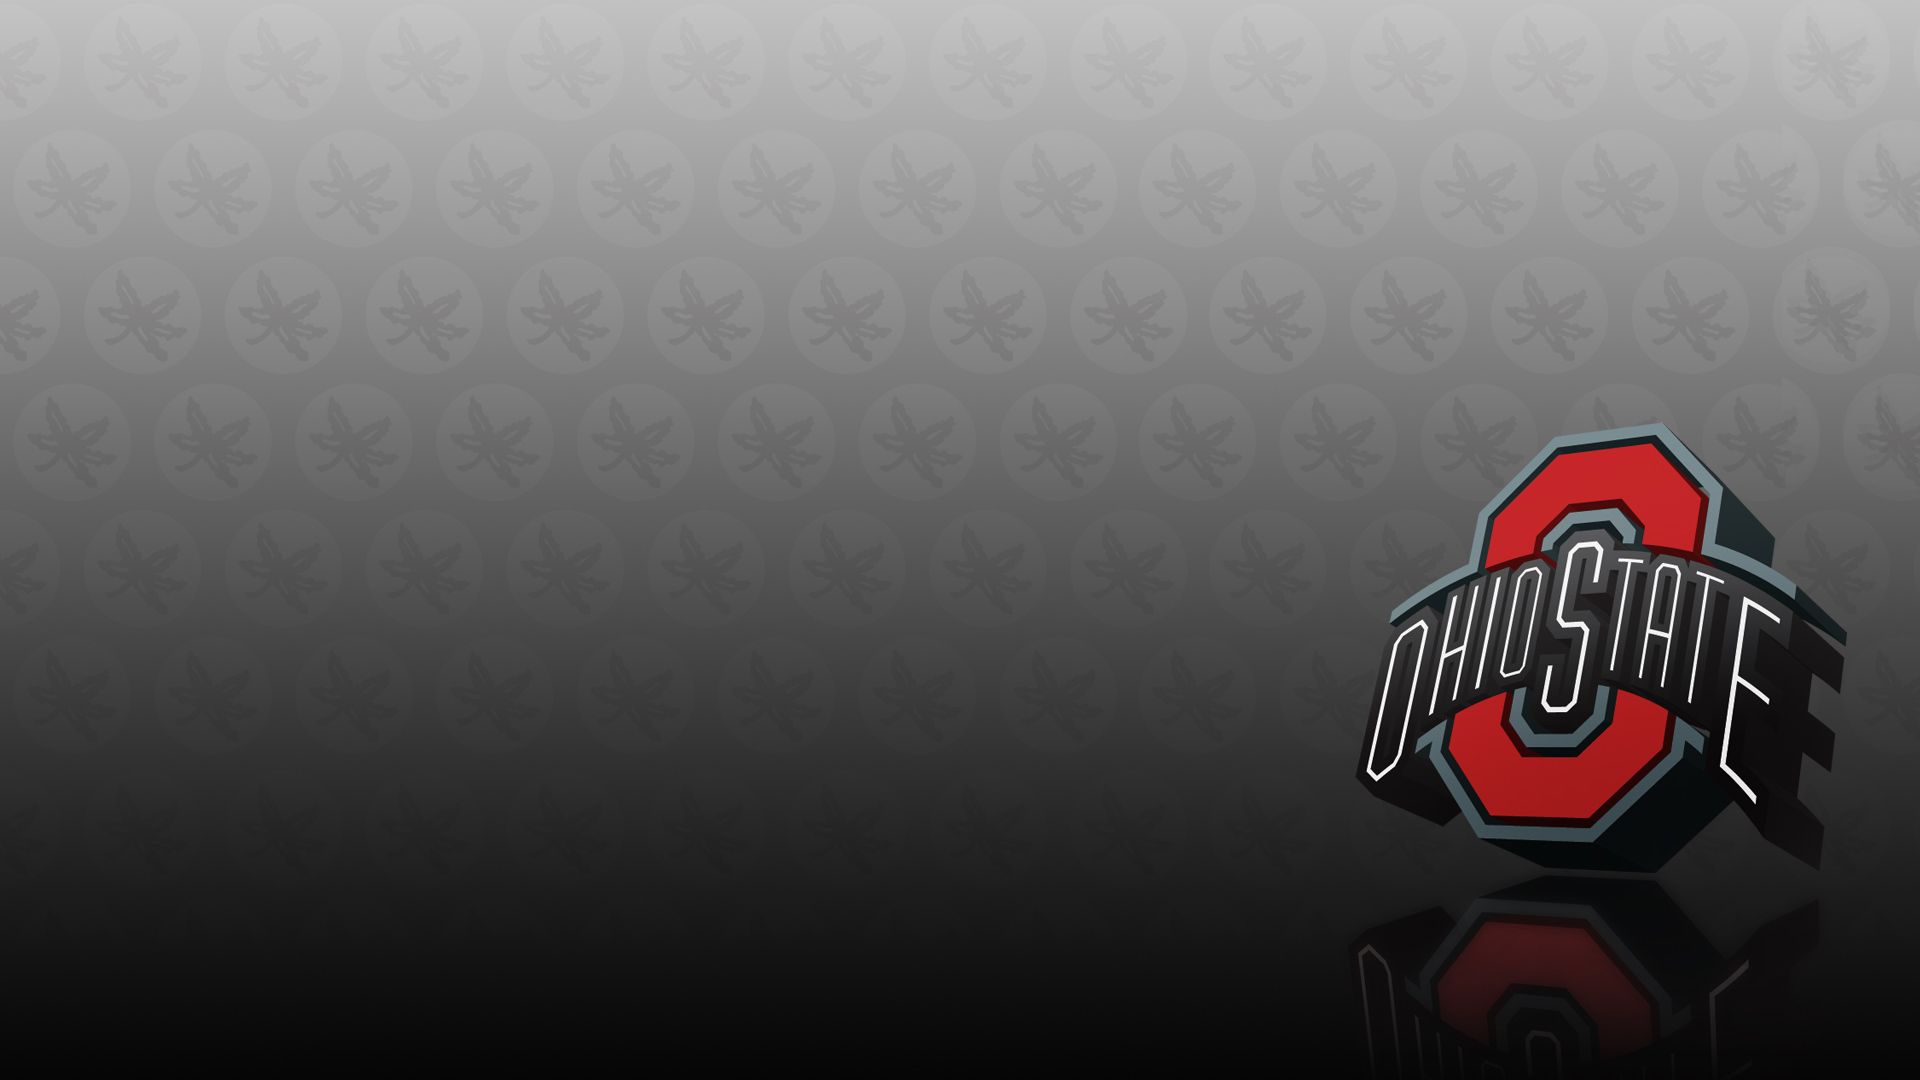 Ohio State Buckeyes Wallpaper Submited Image